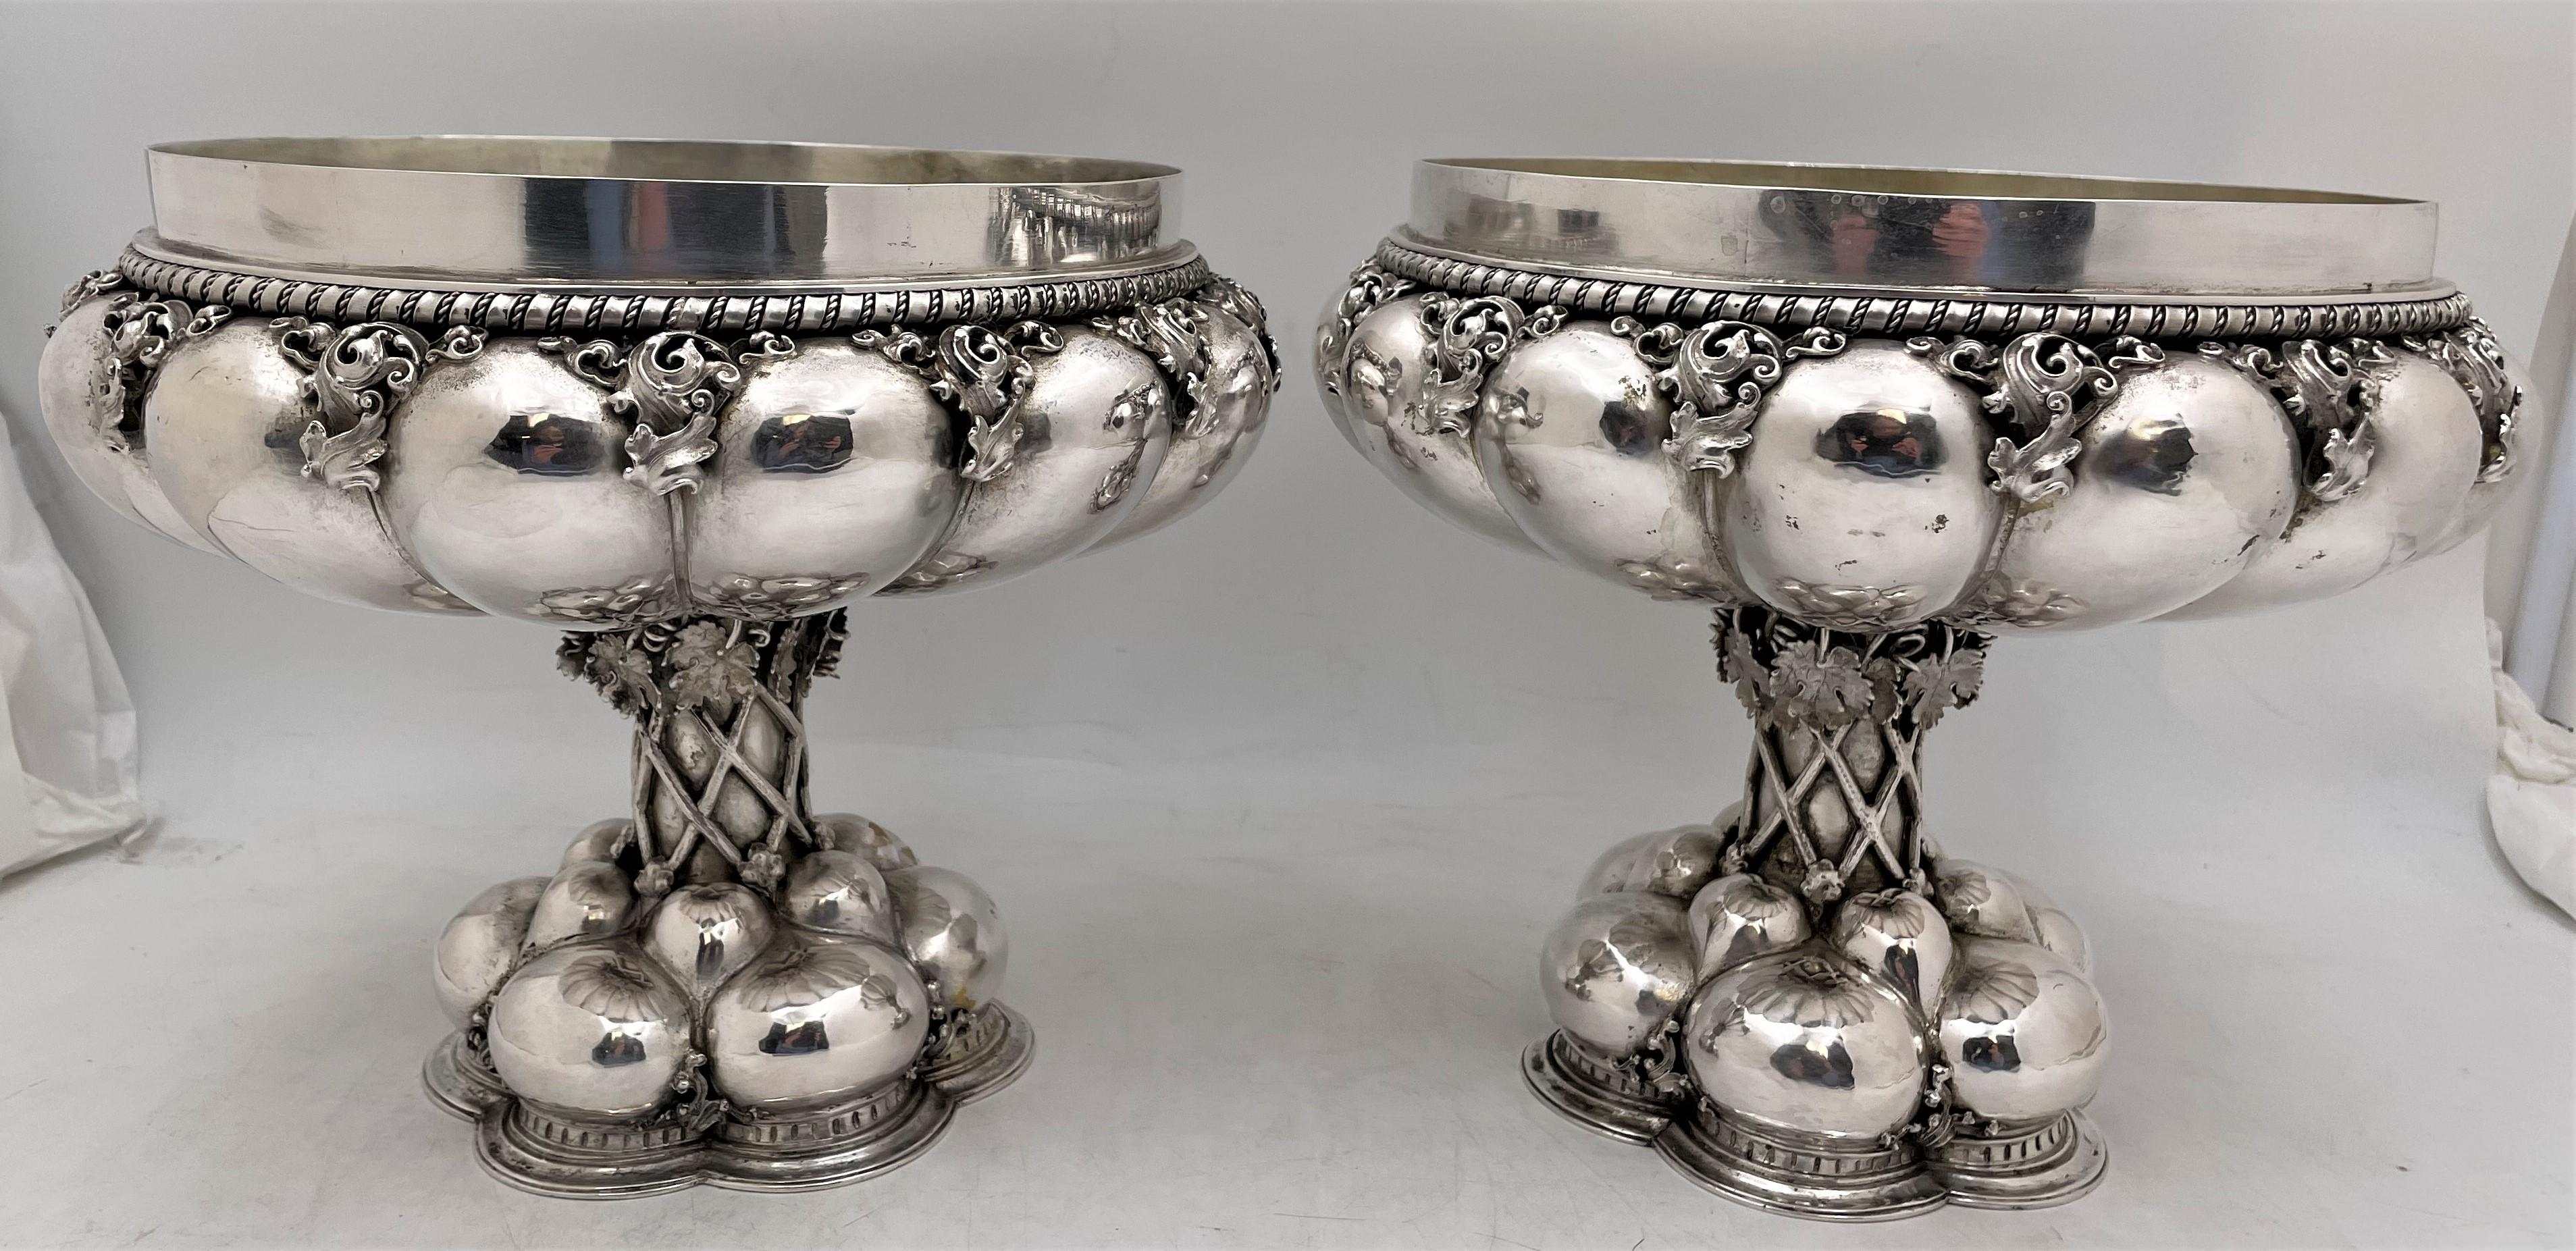 Neresheimer, German continental 0.800 silver pair of compotes or footed centerpiece bowls displaying exquisite craftsmanship in the hammering of the silver and in the delicate decorative motifs adorning the body of the centerpieces from the late